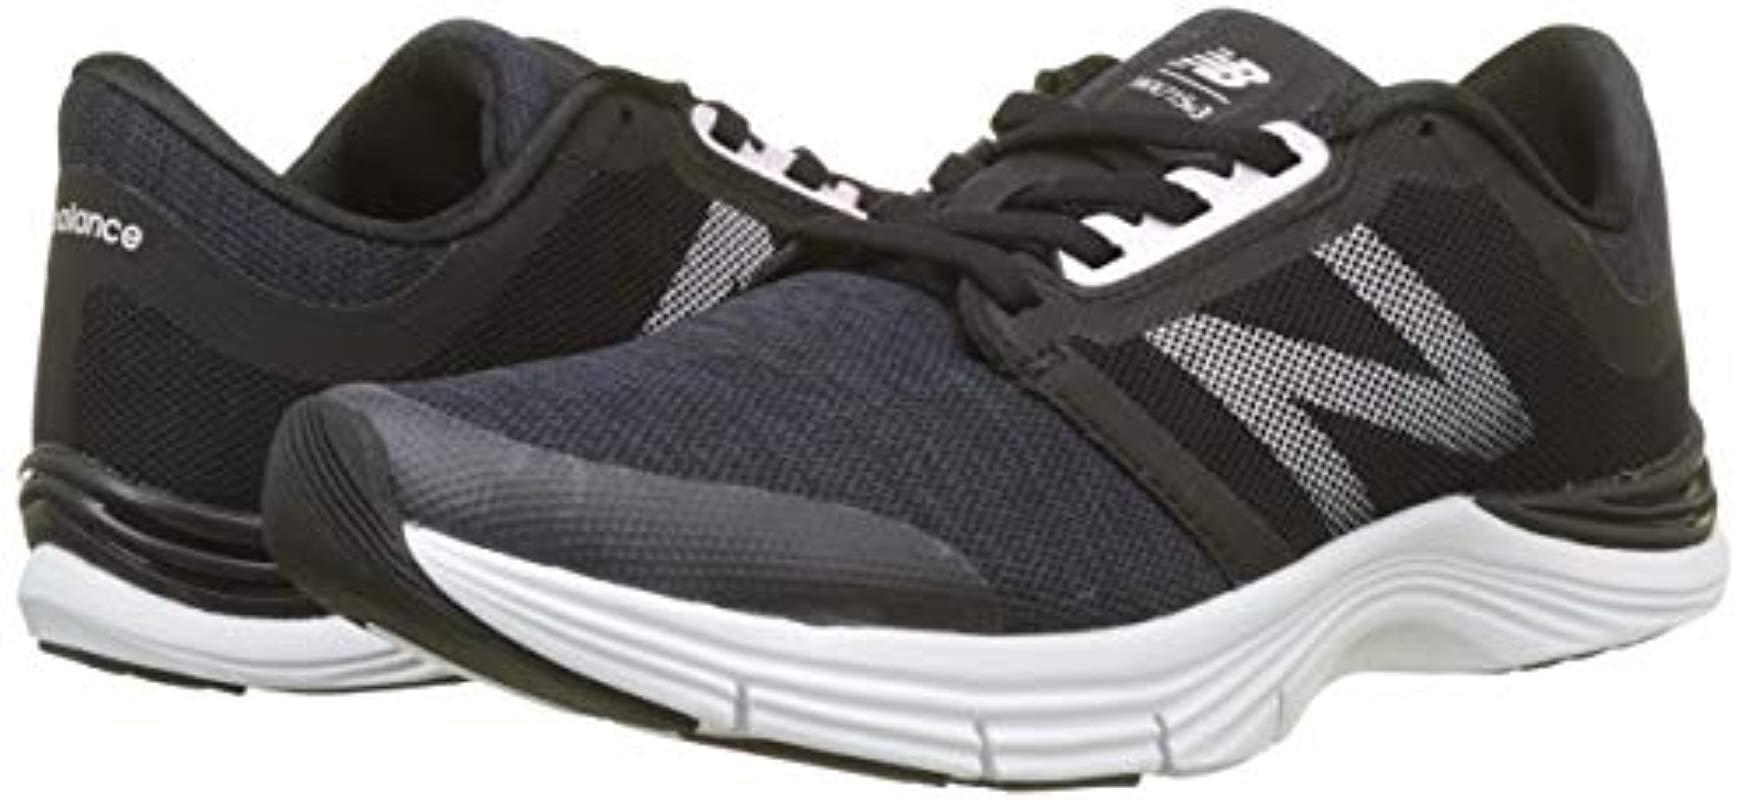 New Balance Wx715v3 Fitness Shoes in 